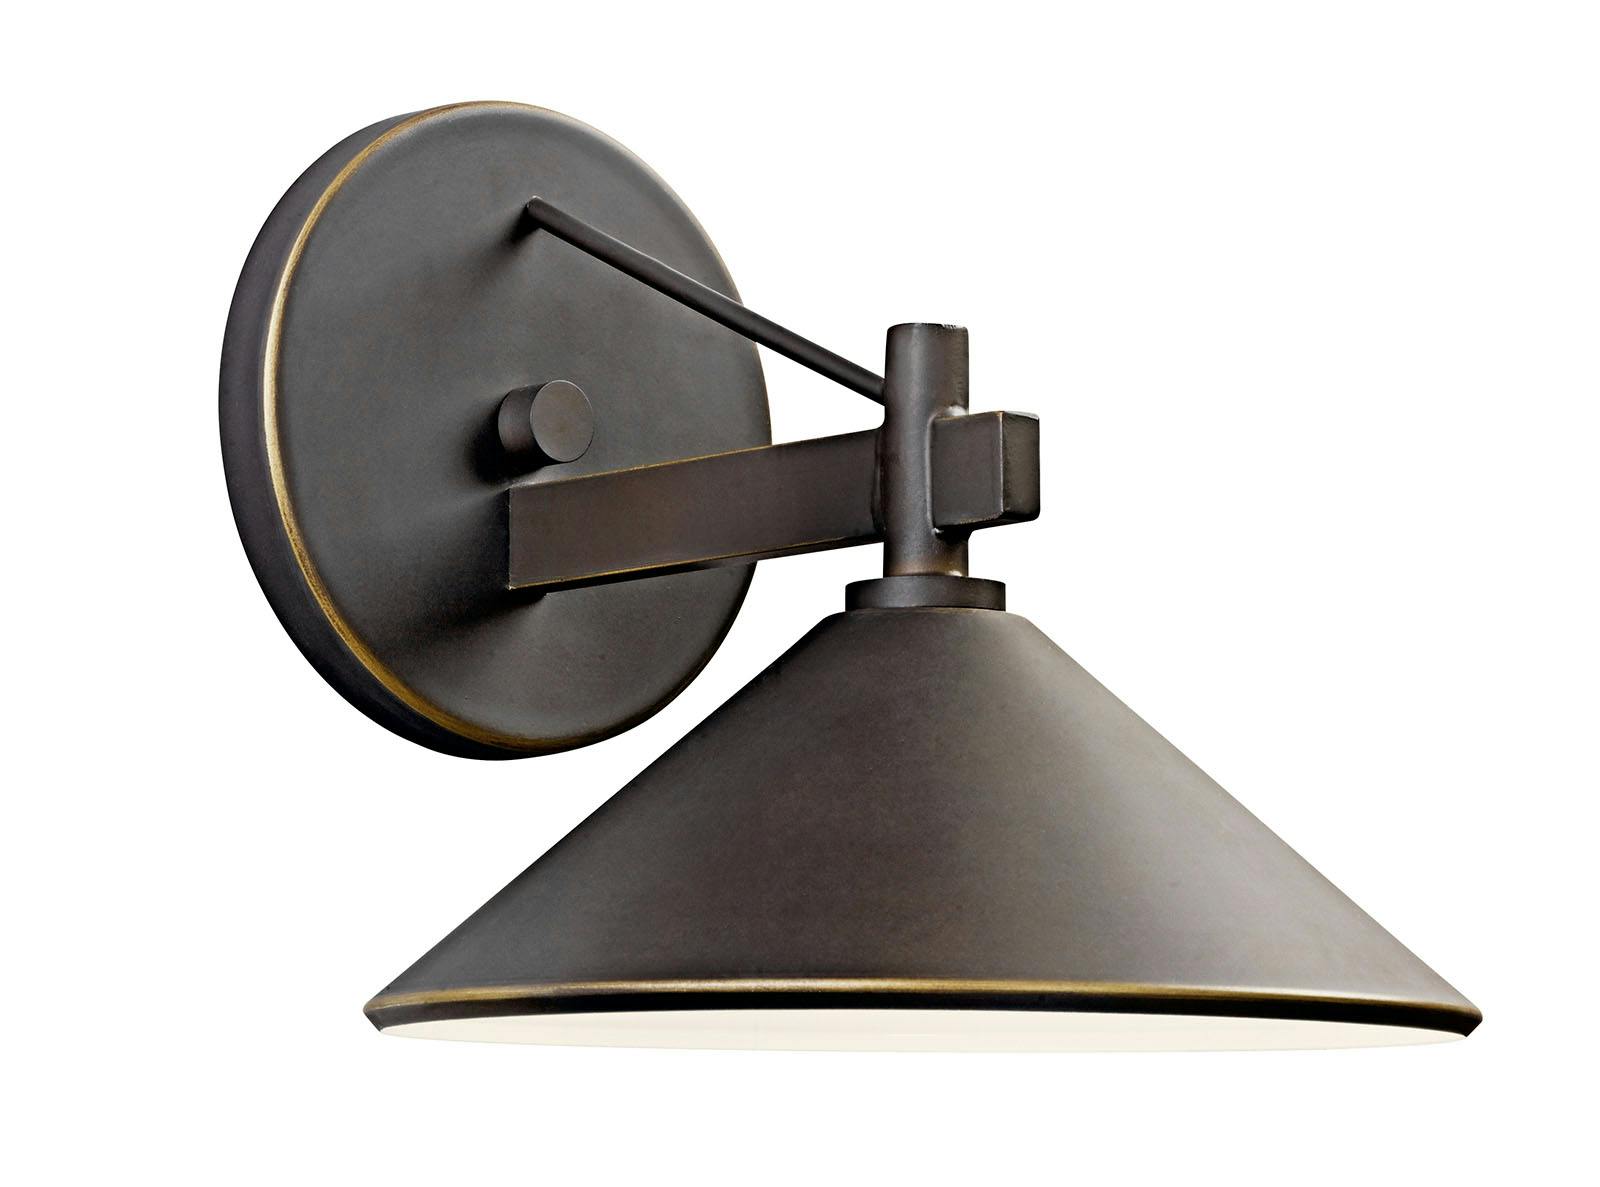 Ripley 7.5" Wall Light Olde Bronze on a white background